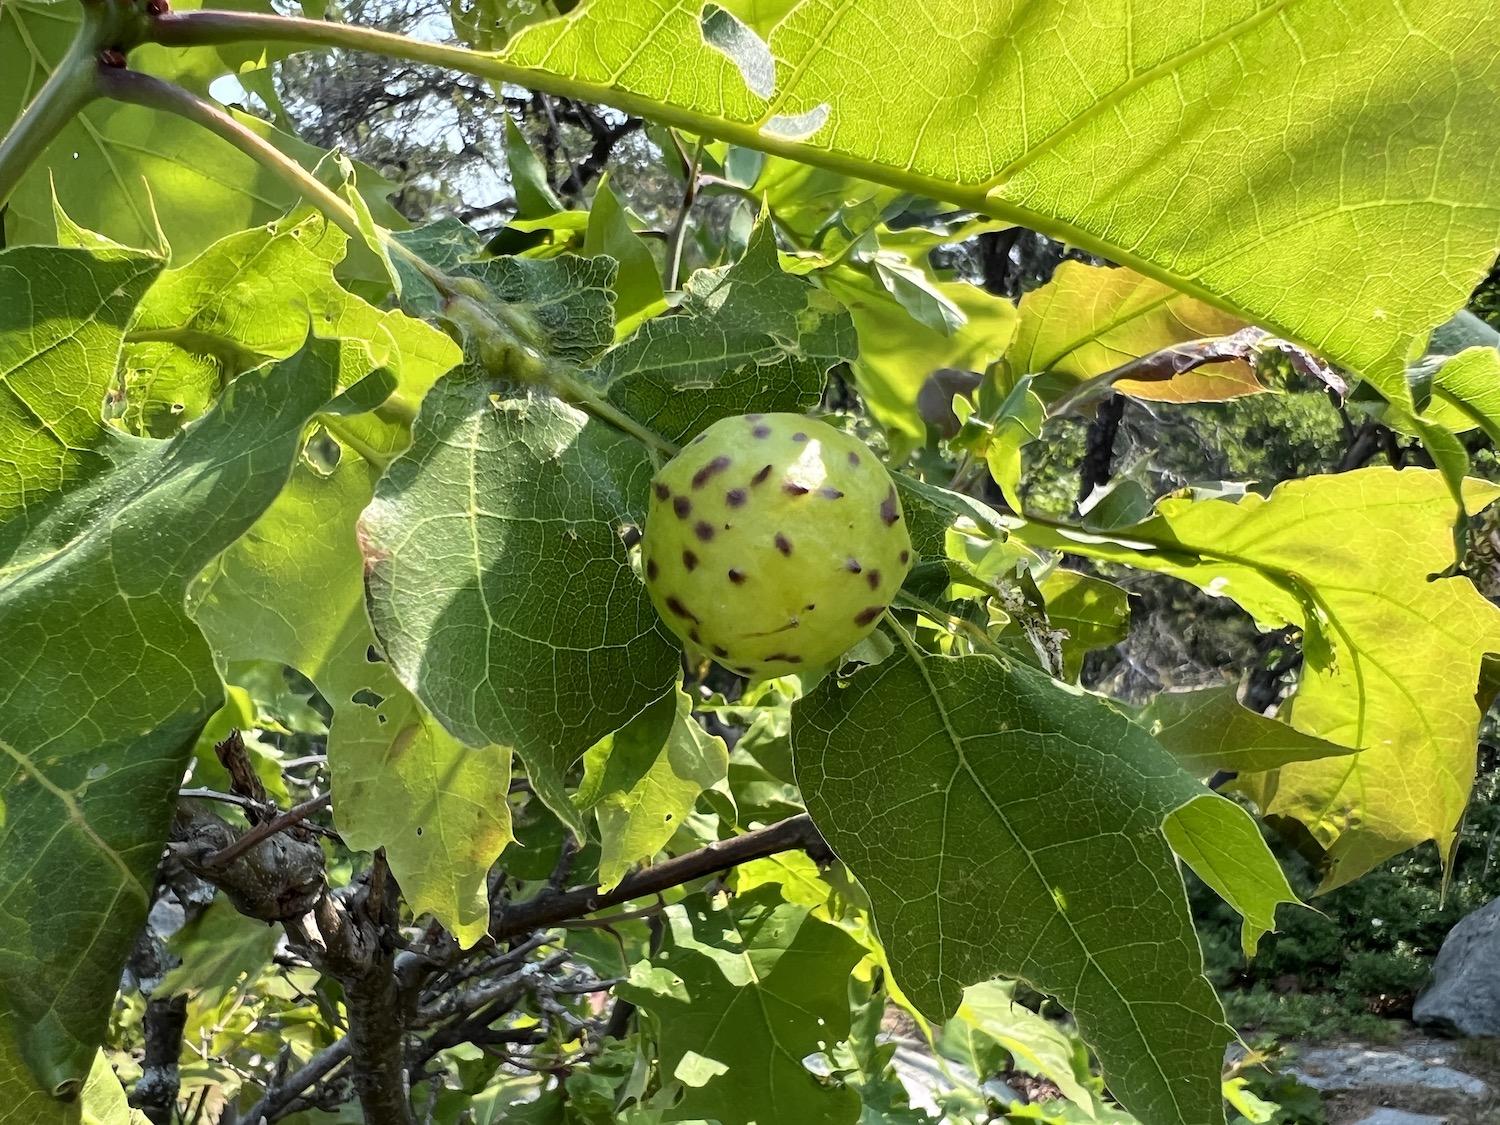 I turned to iNaturalist to identify this Larger Empty Oak Apple Wasp Gall.